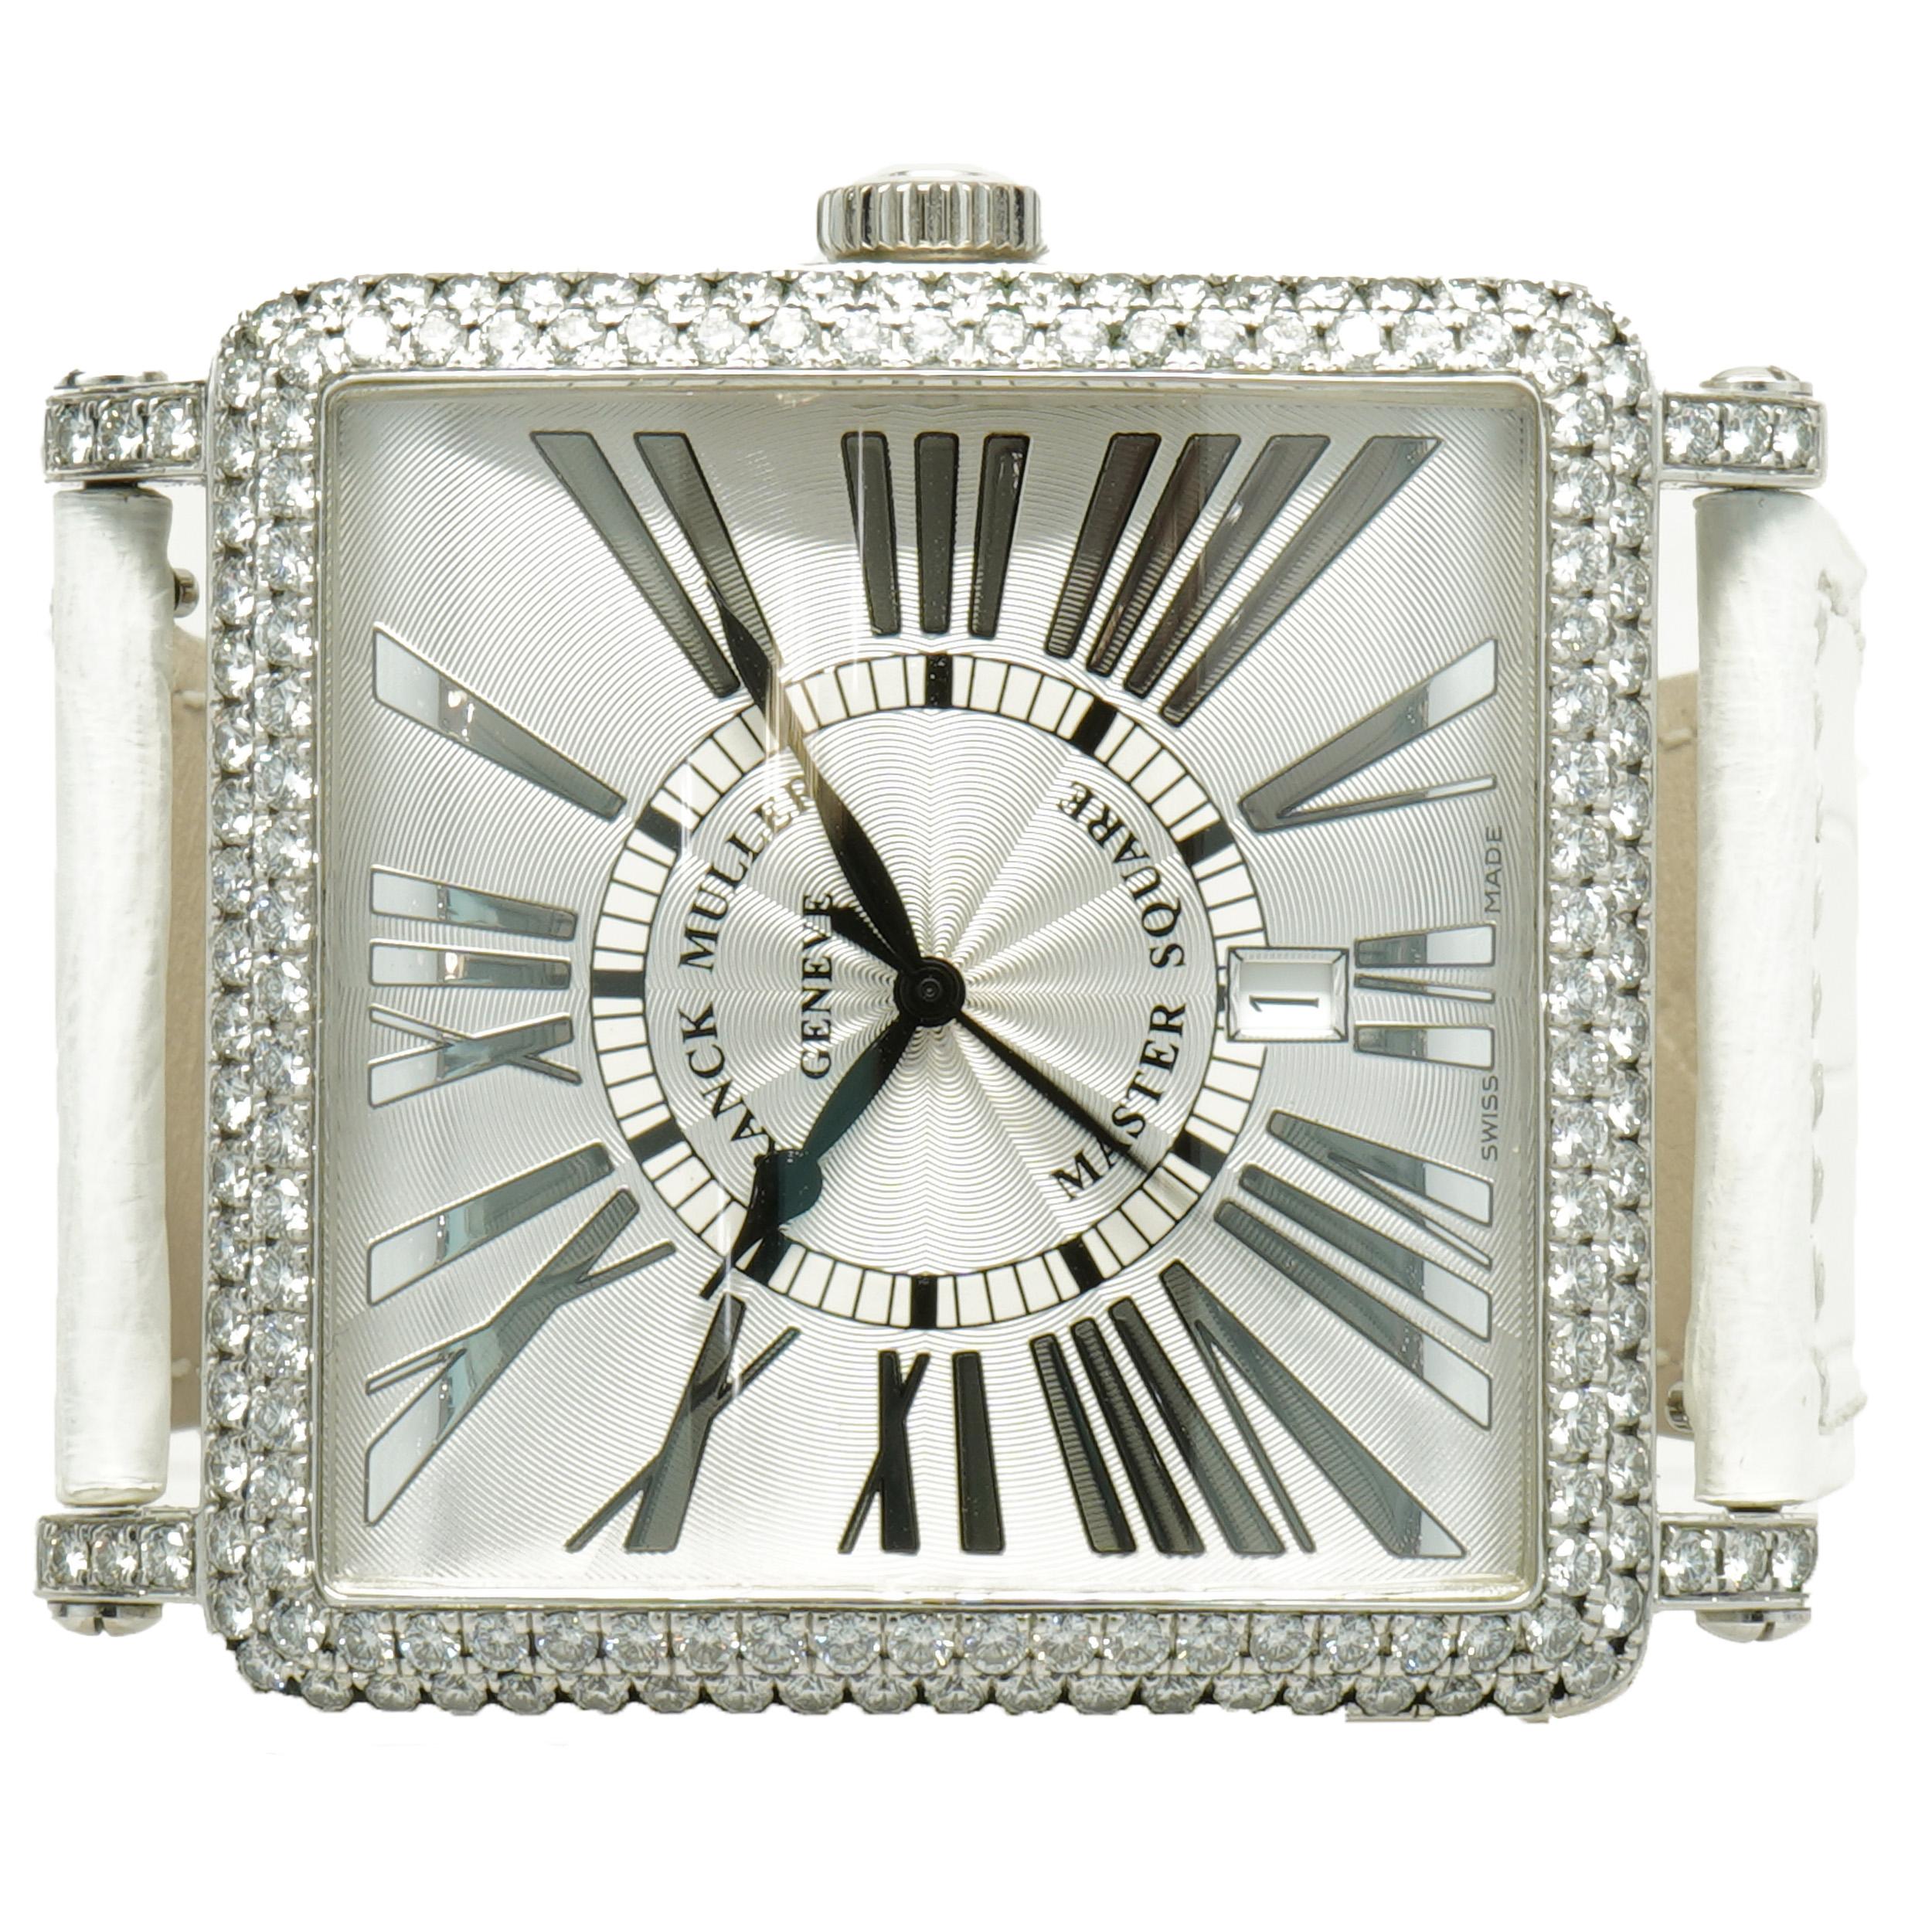 Movement: automatic
Function: hours, minutes, seconds, date
Case: 18k white gold, 42 x 42mm, pave diamond
Band: Franck Muller white leather strap, 18K white gold and diamond buckle
Dial: silver roman
Serial #: No XXX
Reference #: 6000 K SC

No box